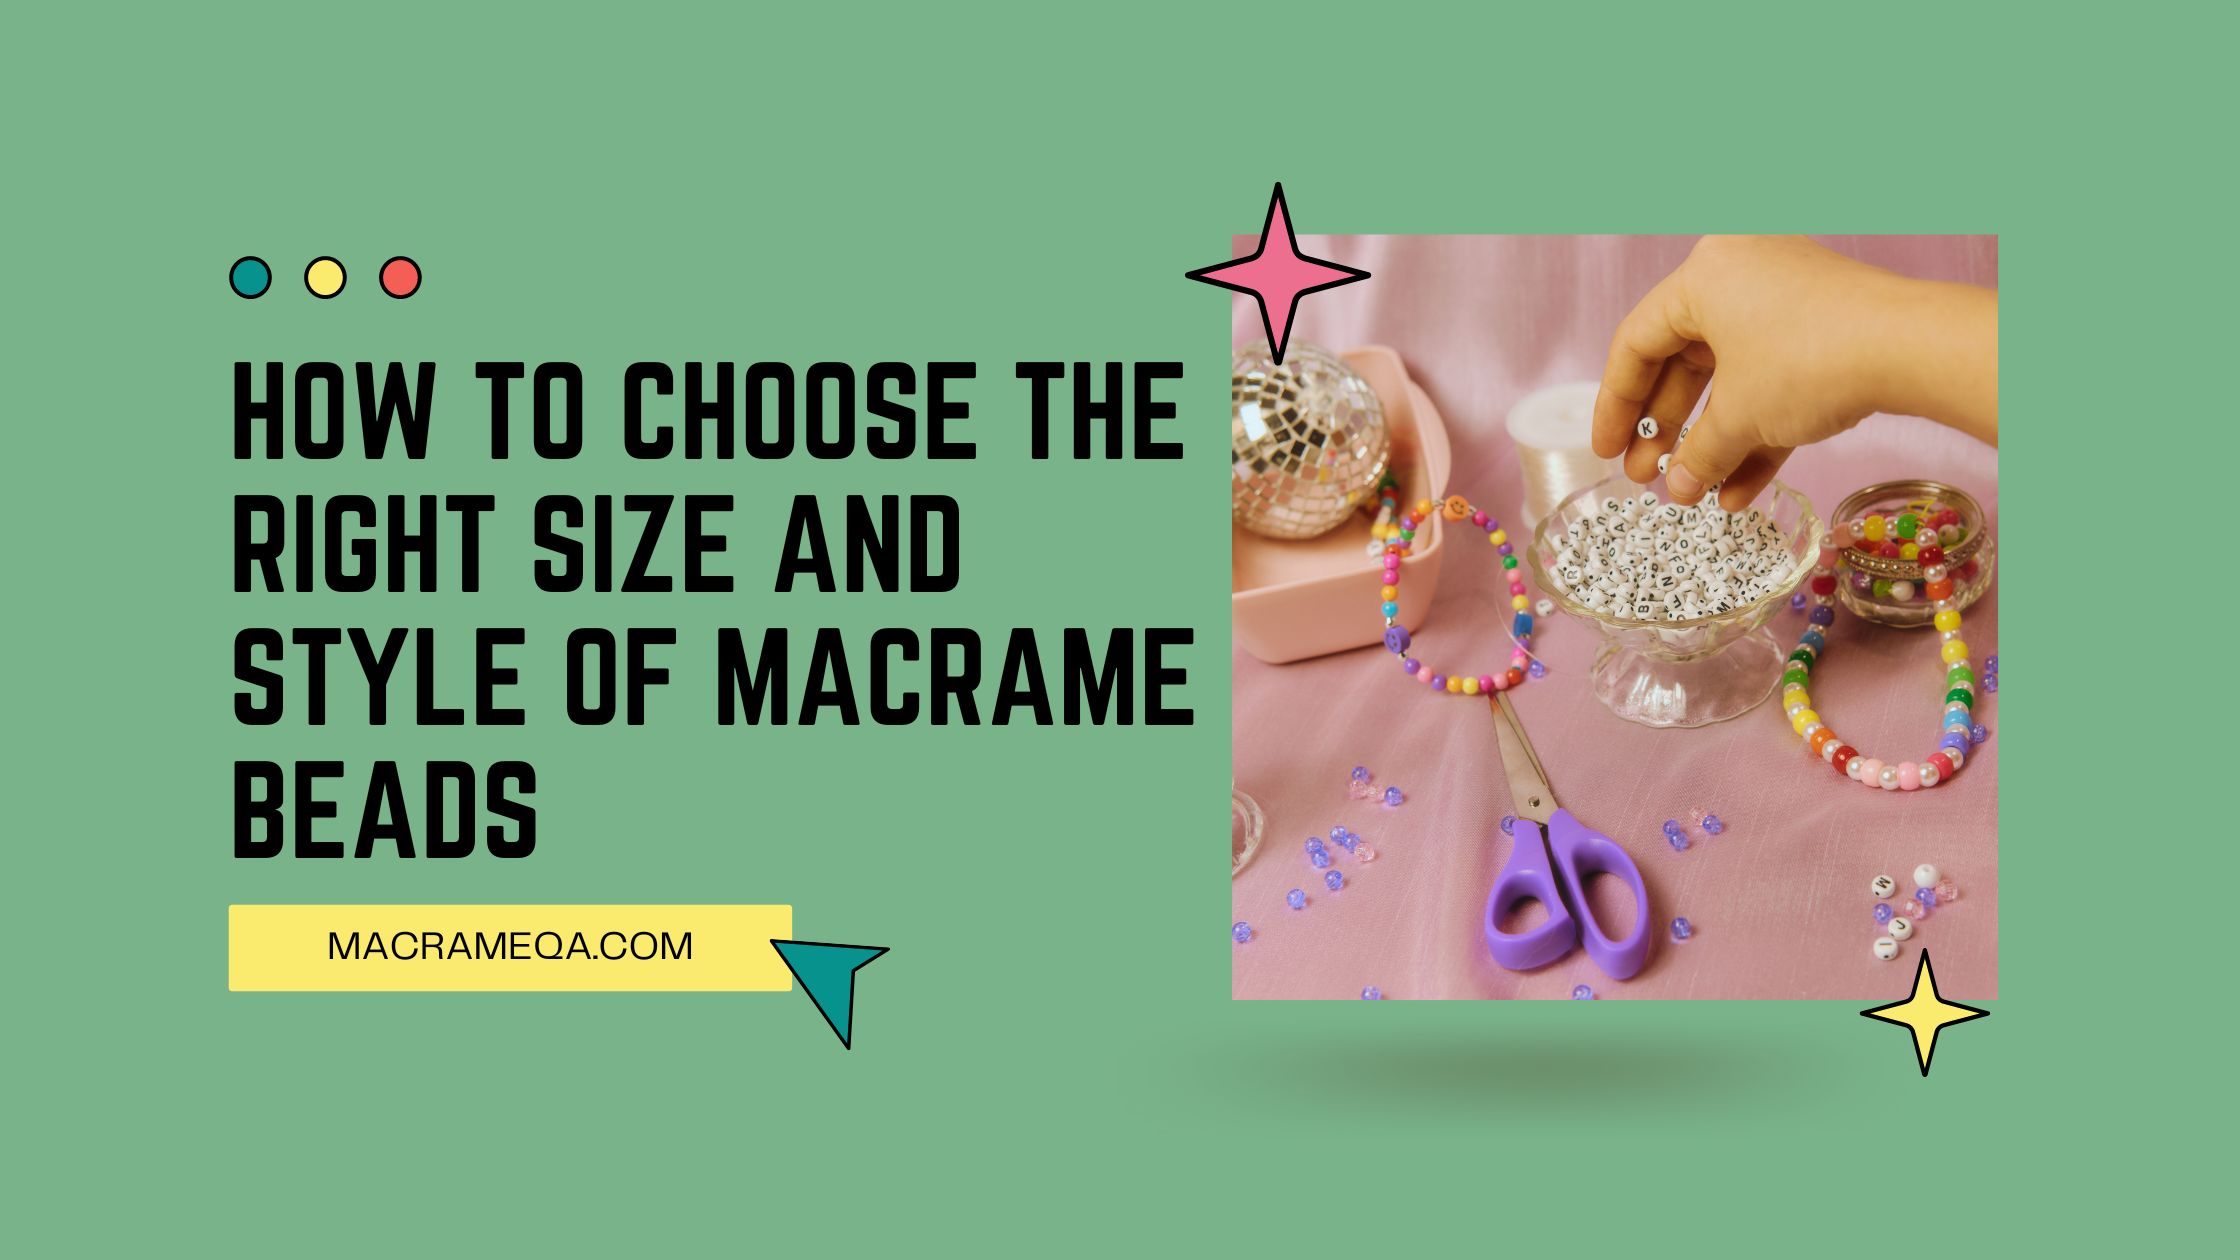 How To Choose The Right Size And Style Of Macrame Beads